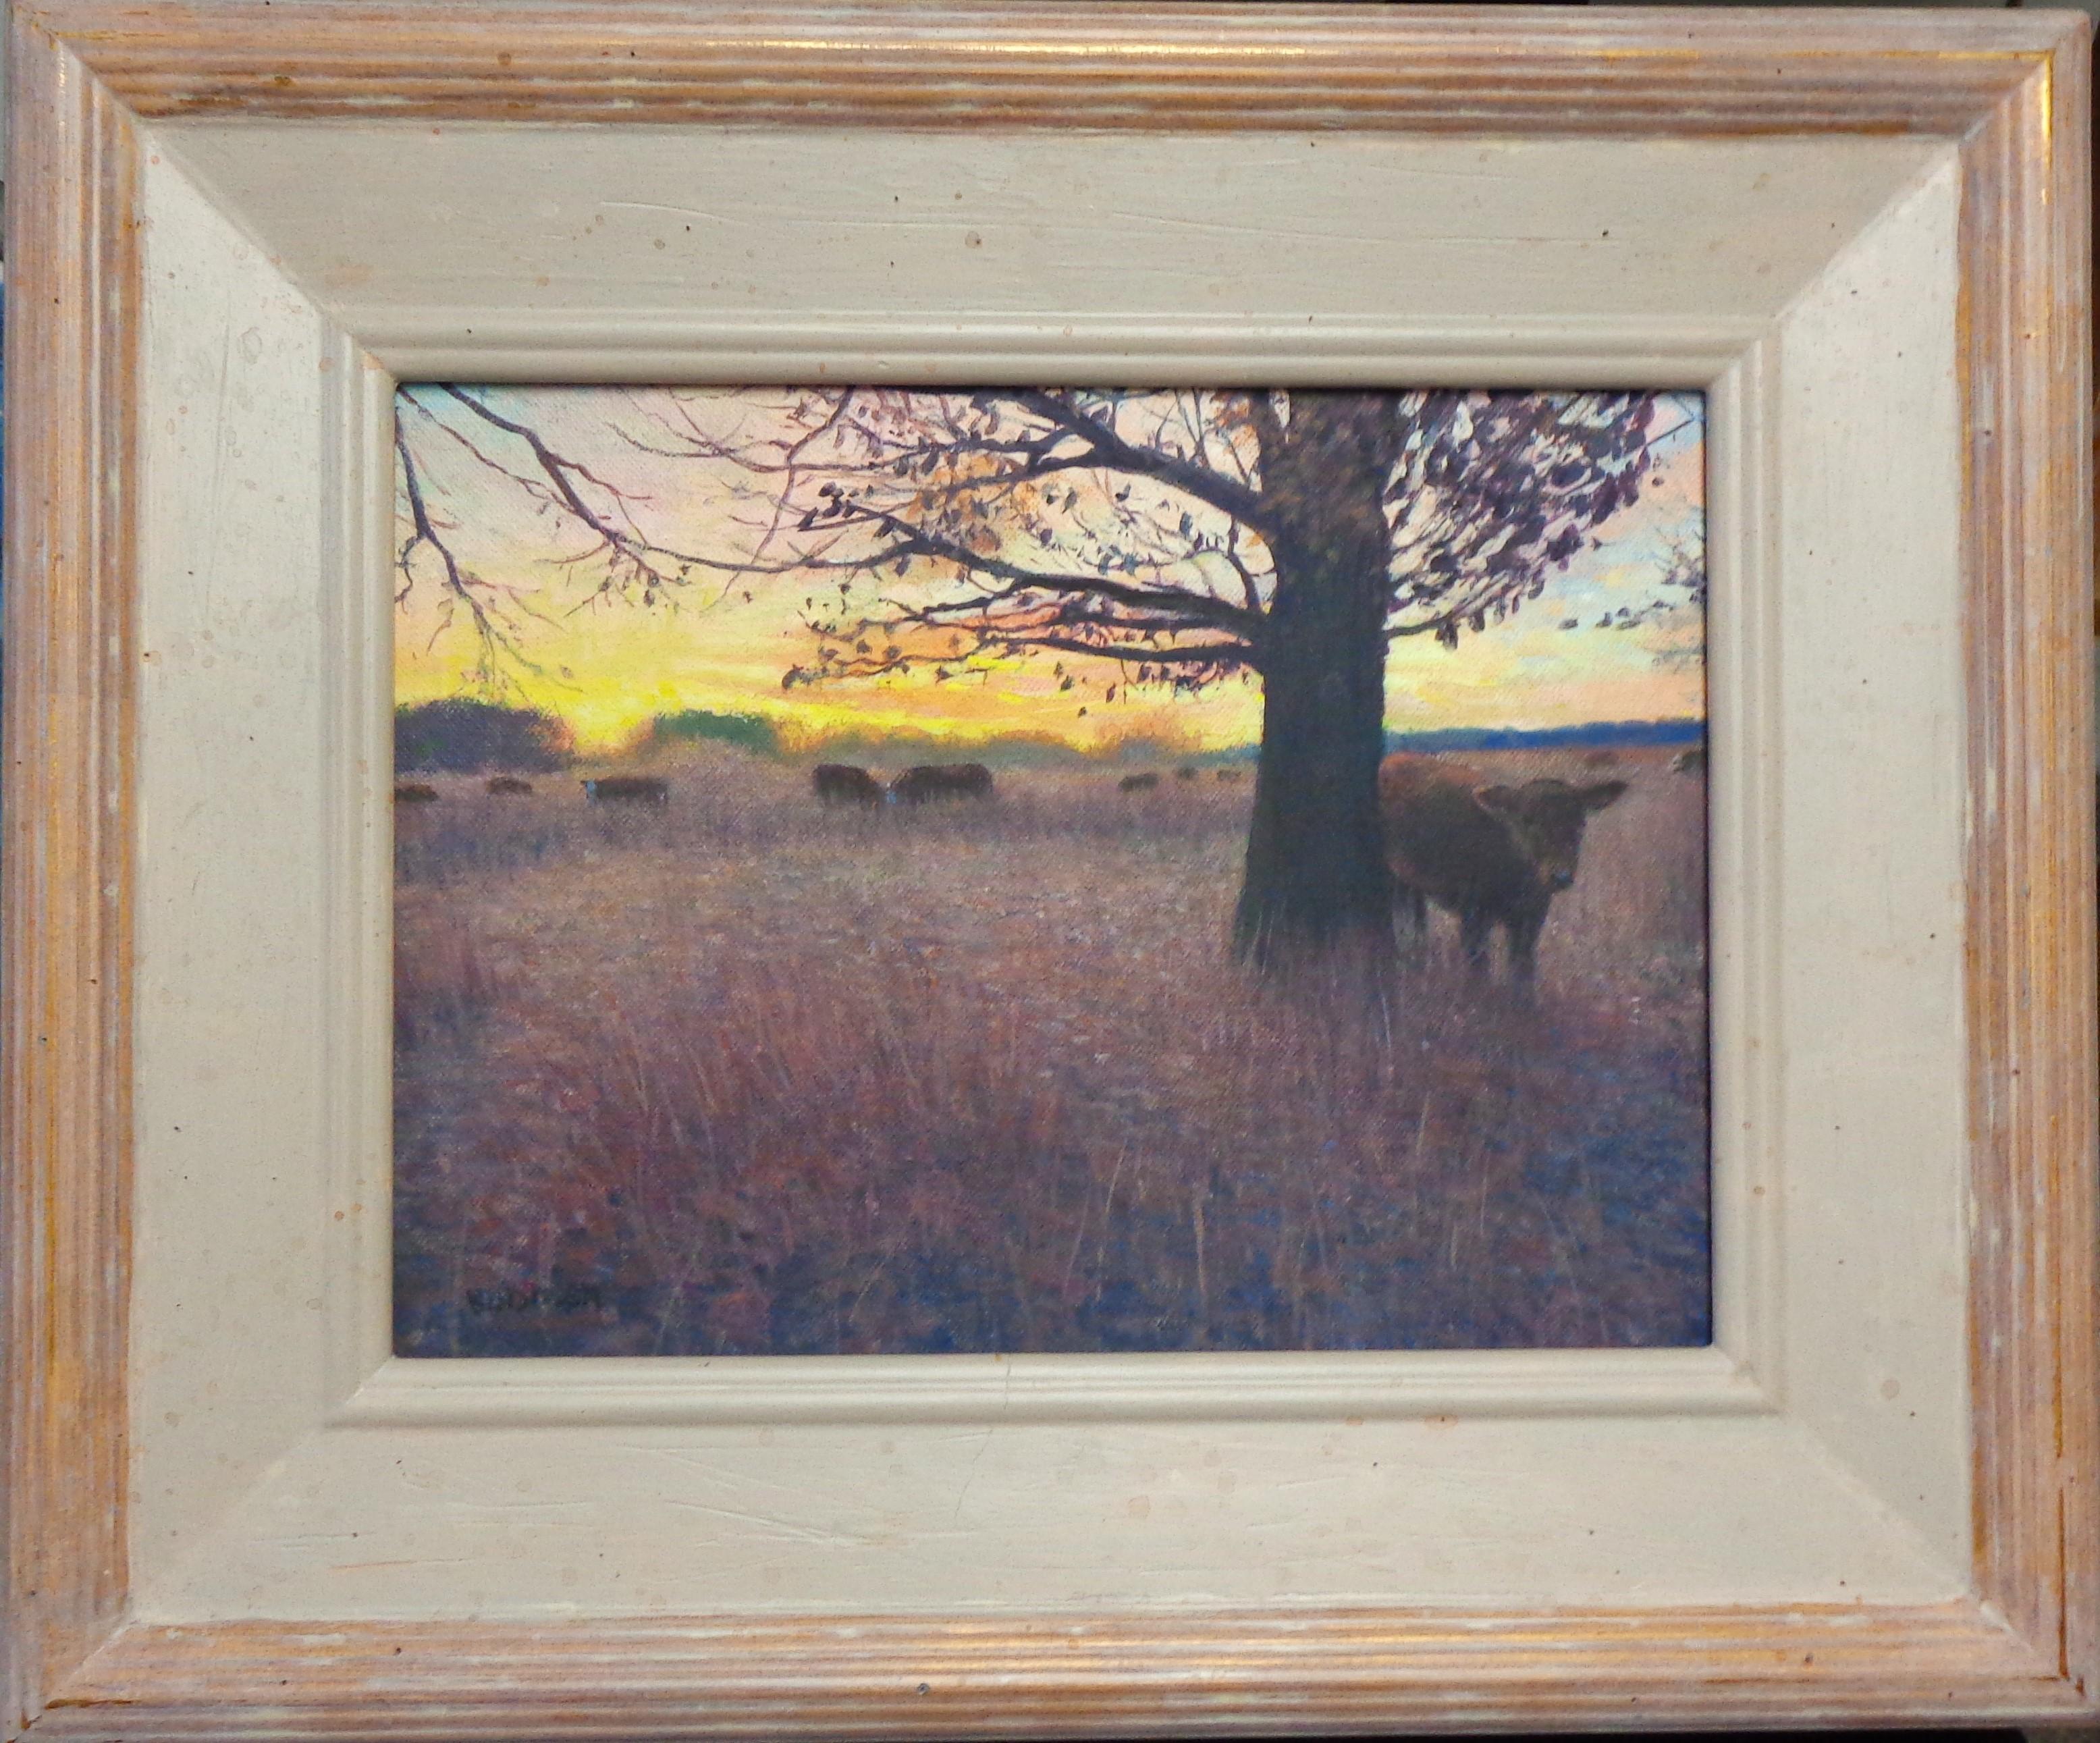 Morning Pasture II, Cows is an oil painting on canvas panel by award winning contemporary artist Michael Budden that showcases a beautiful sunrise view of a meadow housed in an antiqued neutral frame.  This painting is new and the image measures 9 x